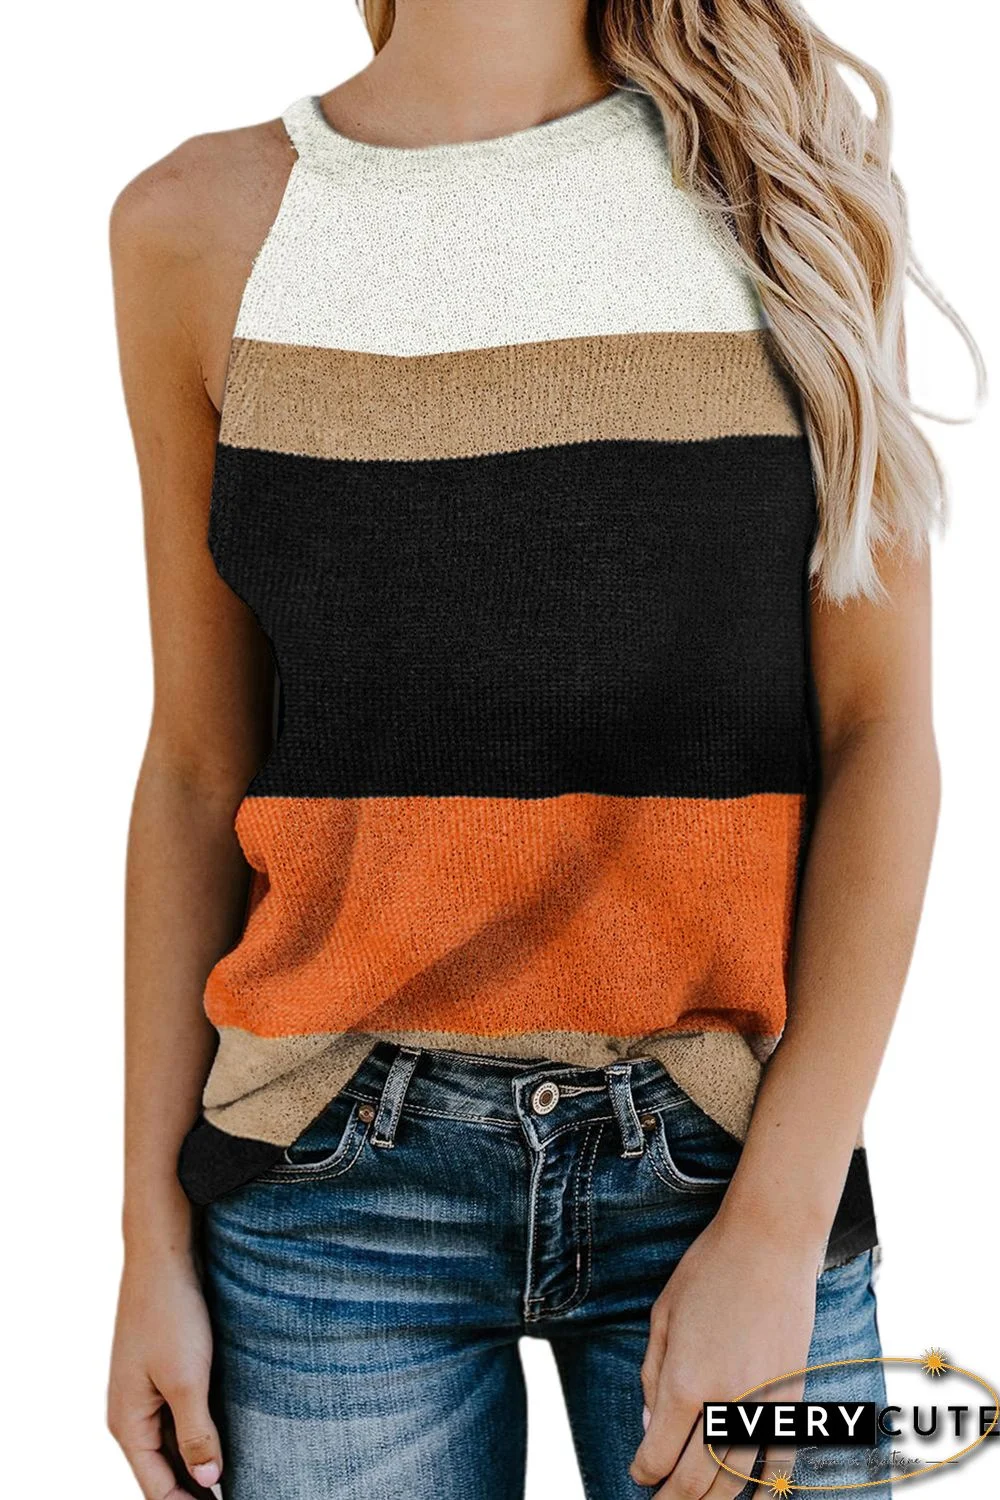 Orange Color Block Knitted Tank Top